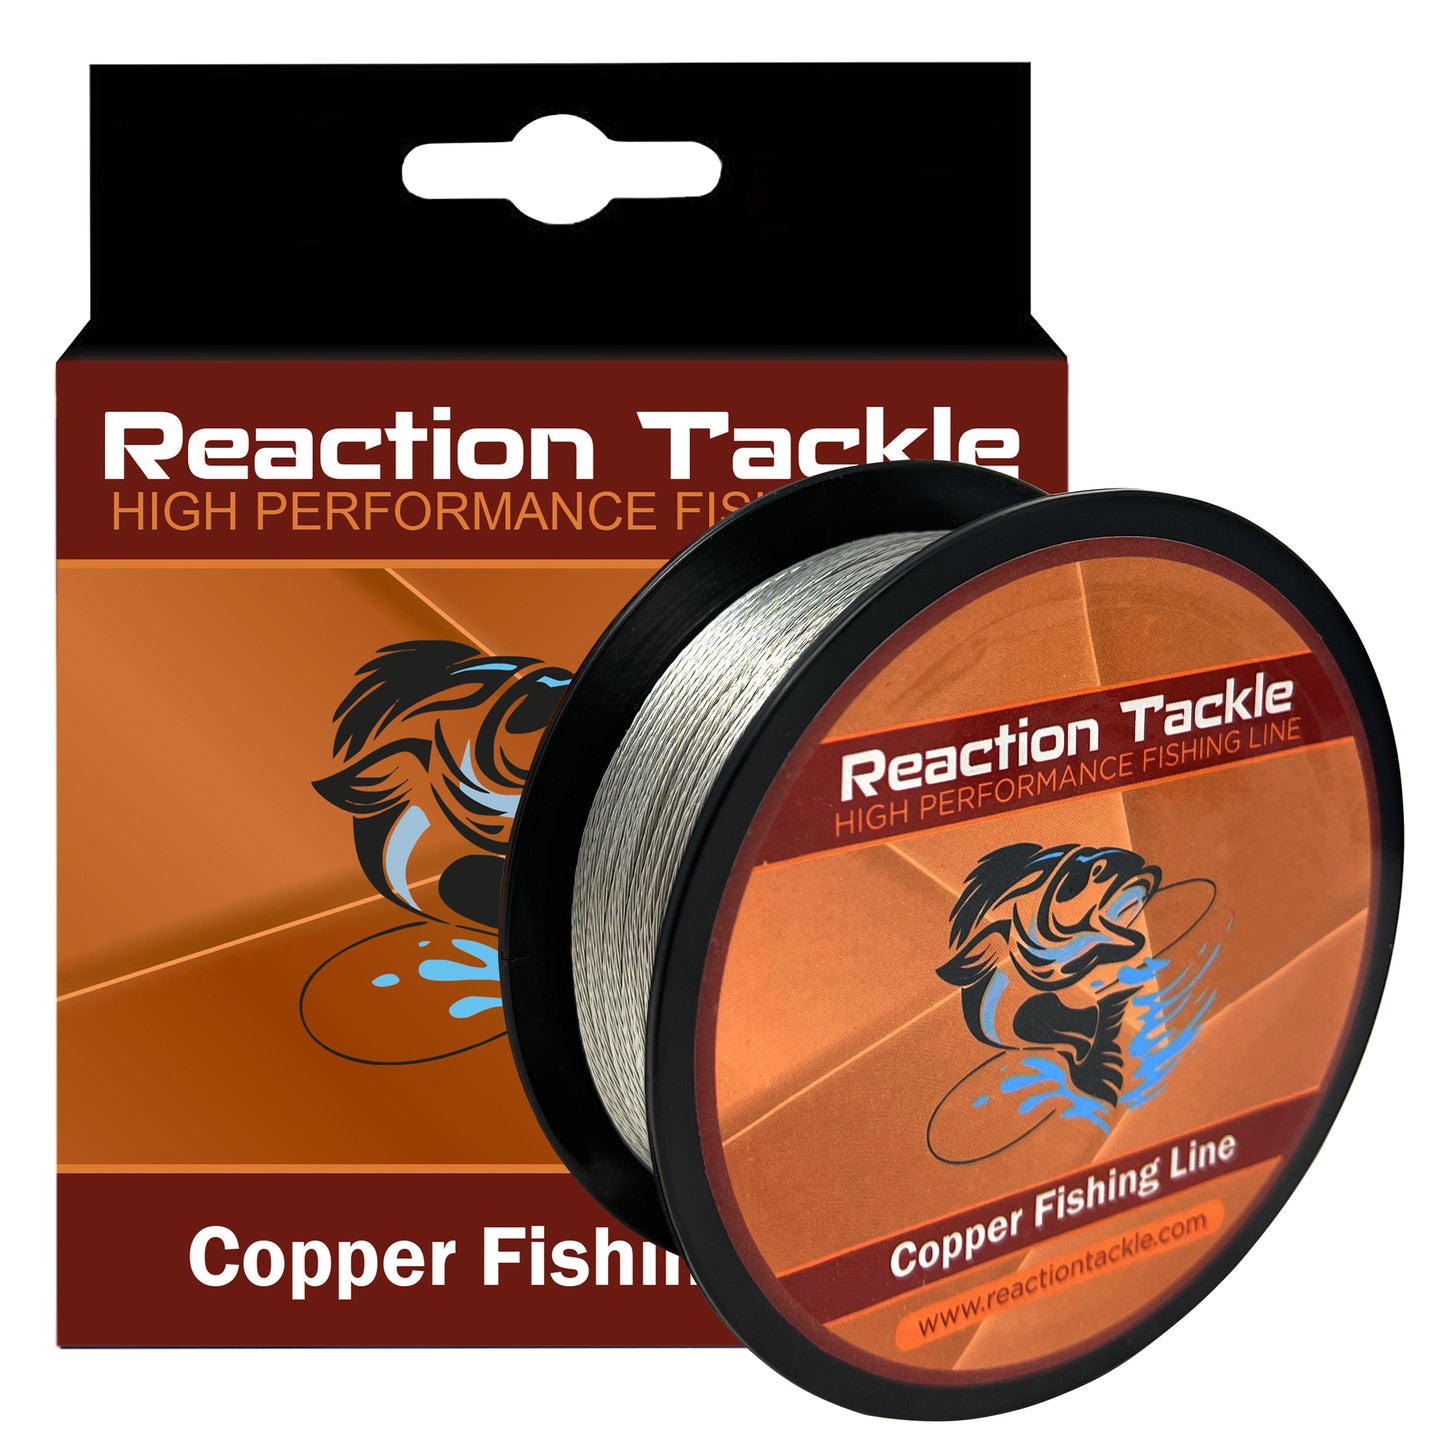 Reaction Tackle Copper Fishing Line - Trolling Wire - Tin Coated